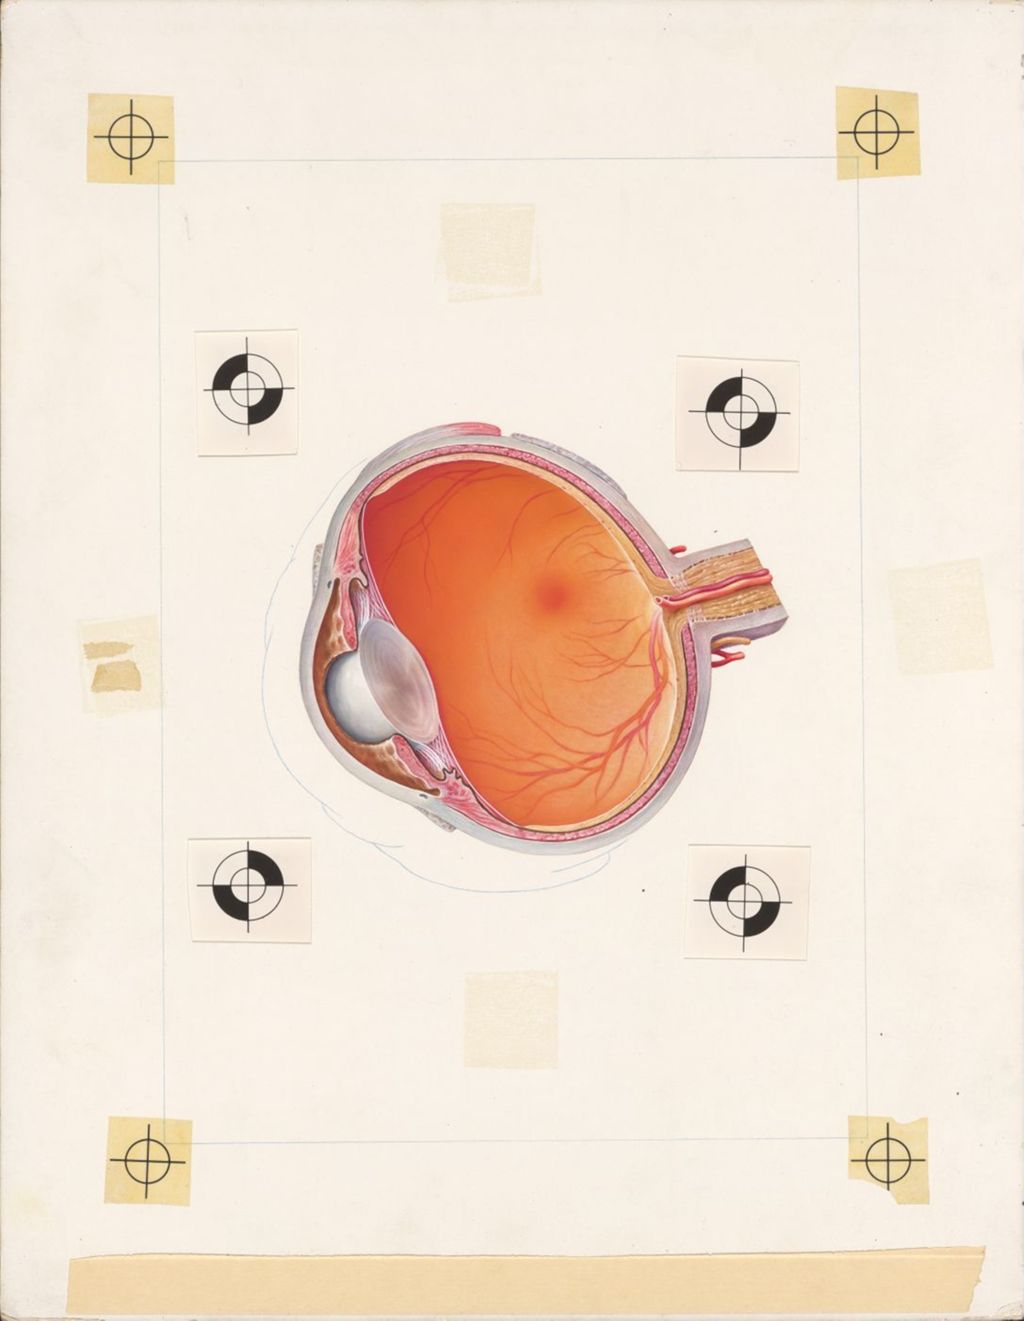 The Normal Eye, Progressively Deeper Dissections, D, Obliquely Sectioned Eye Showing the Relationship of Its Coats